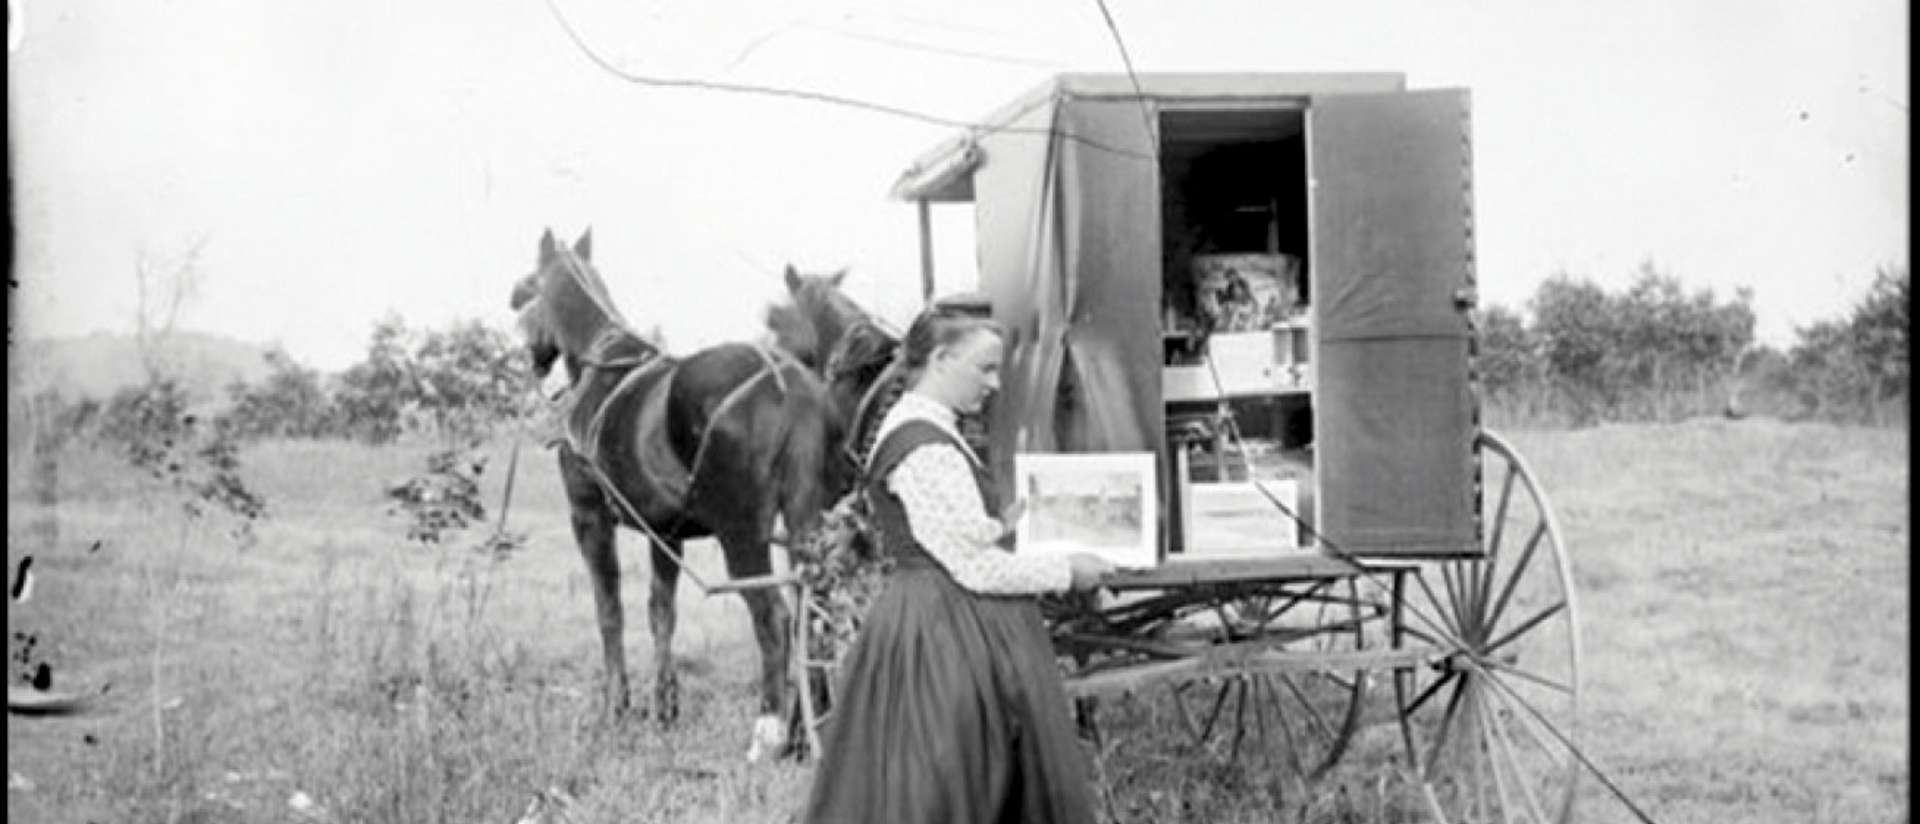 Photo used in "Fauxtography" exhibit, woman by a wagon